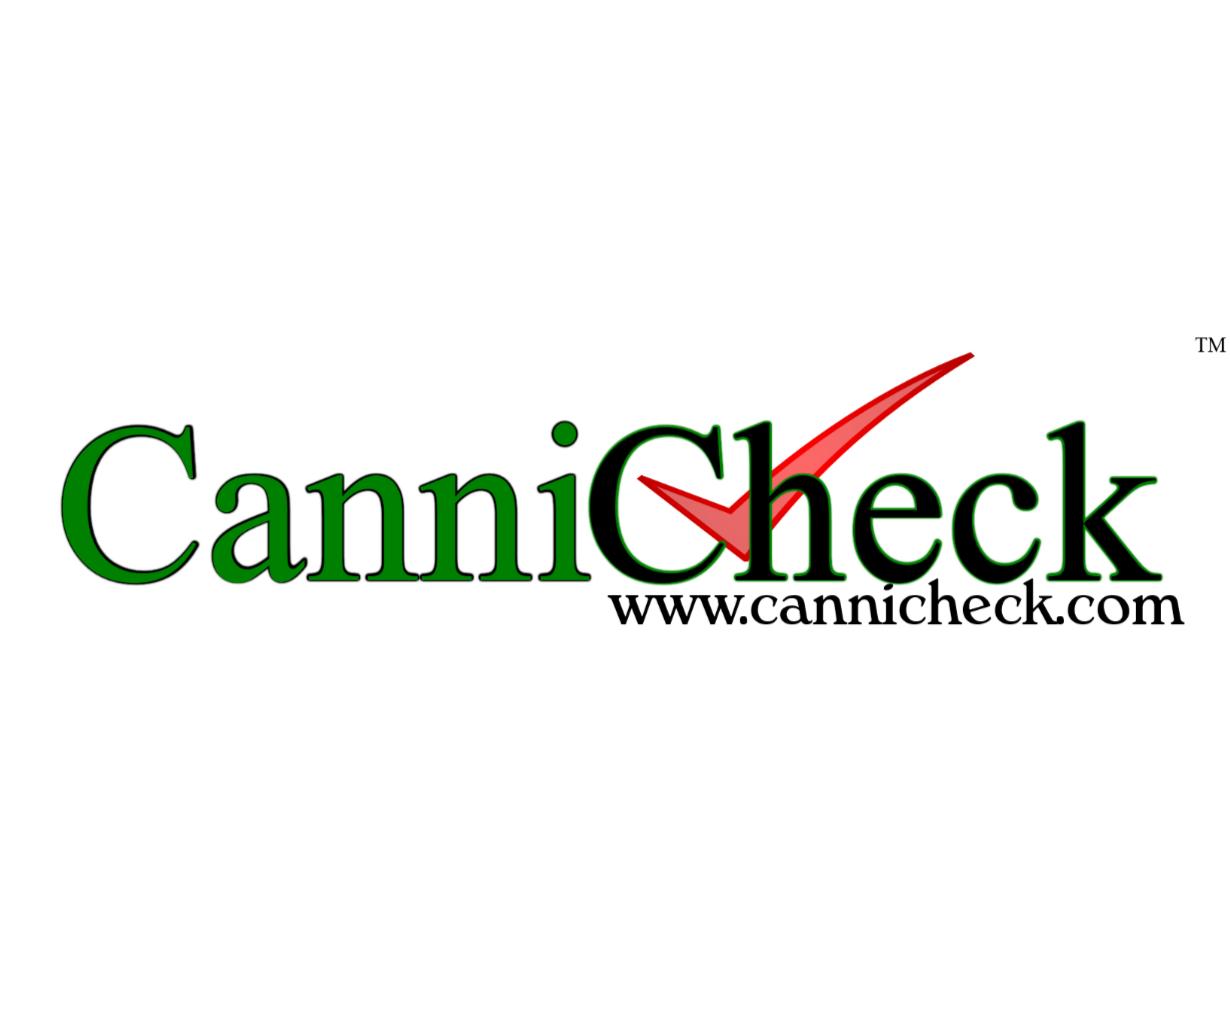 CannICheck, Tuesday, February 8, 2022, Press release picture